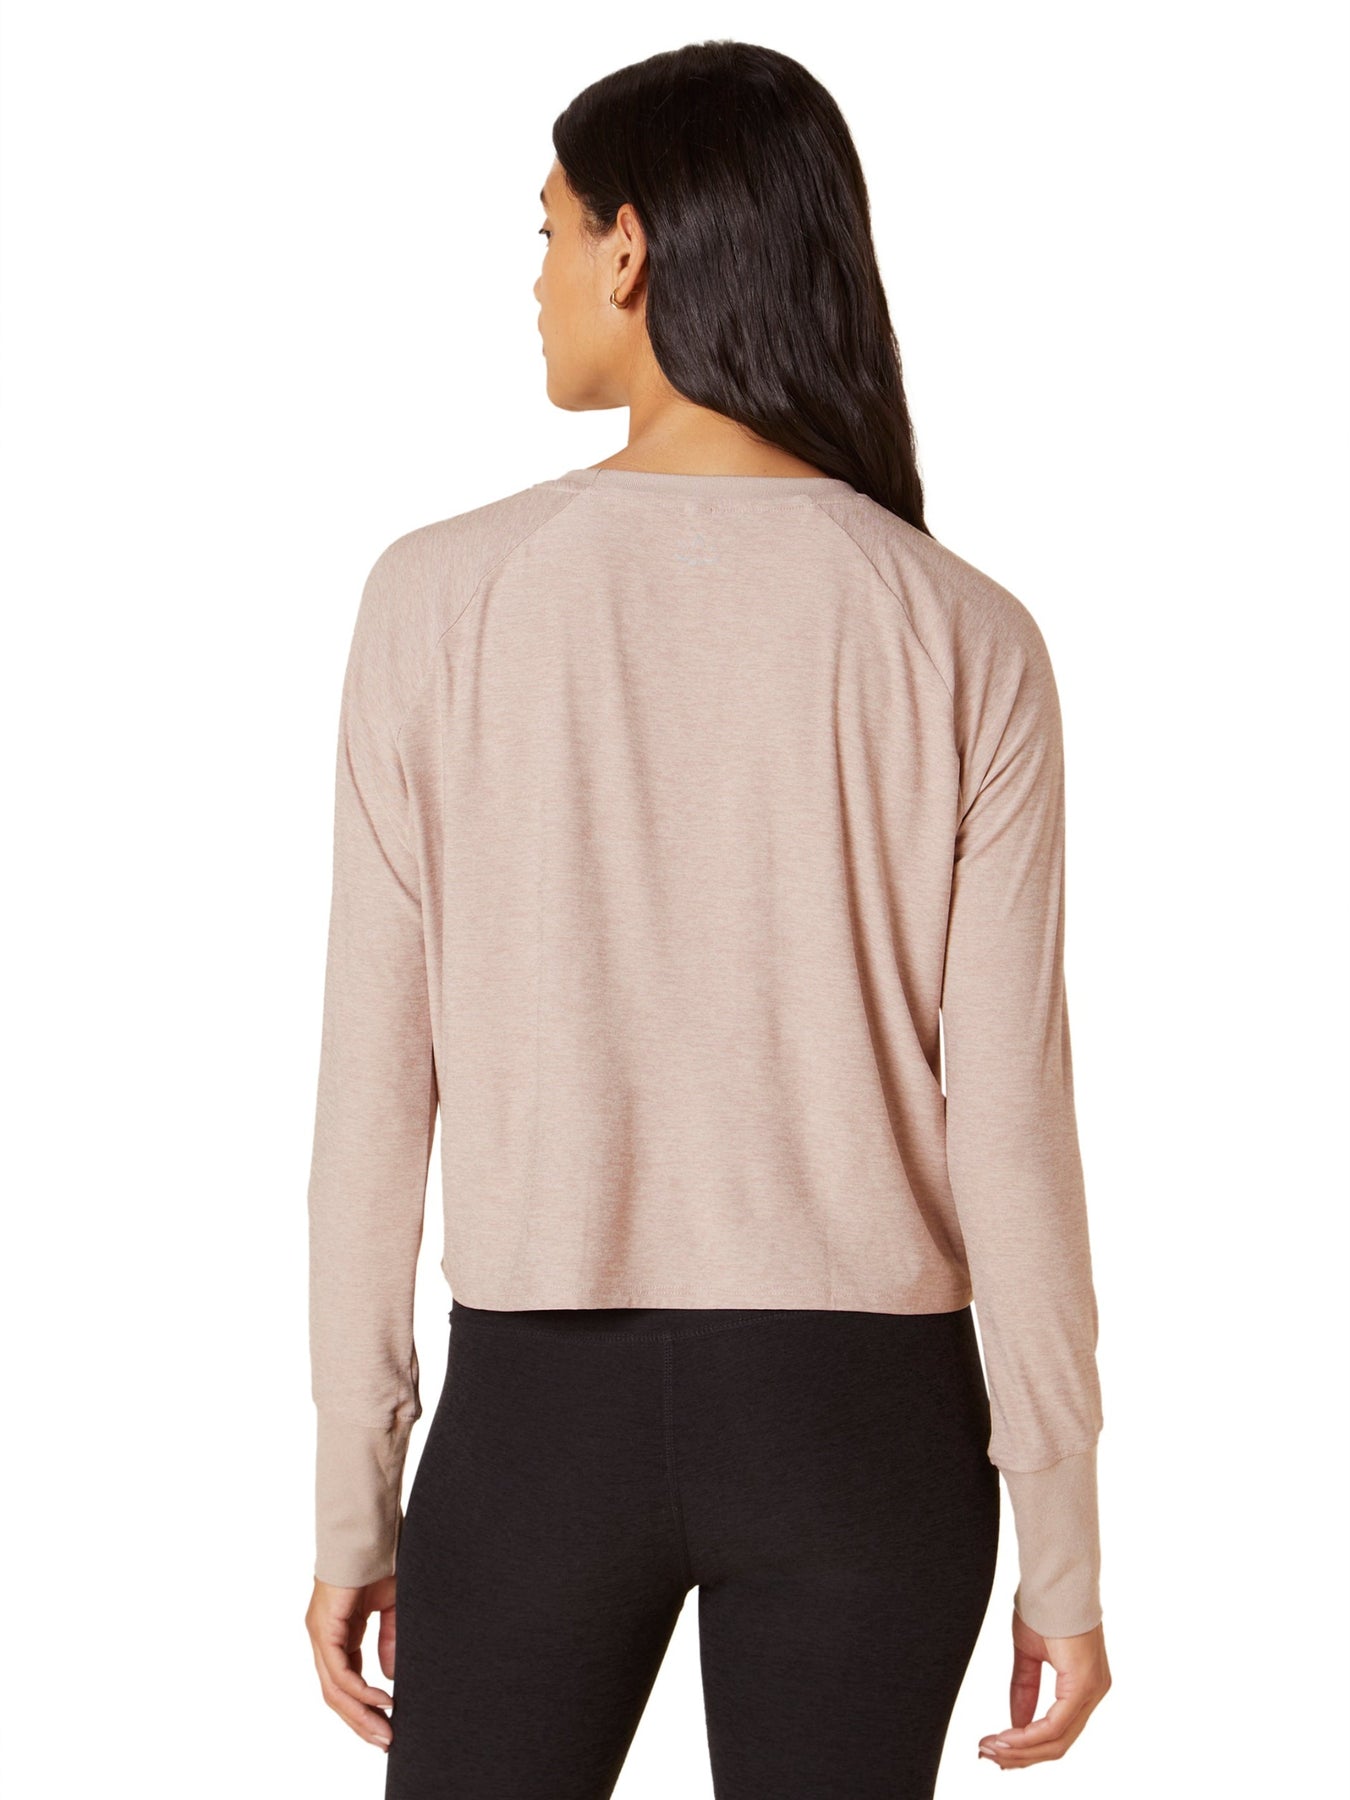 Beyond Yoga Afternoon Light Pullover – CorePower Yoga